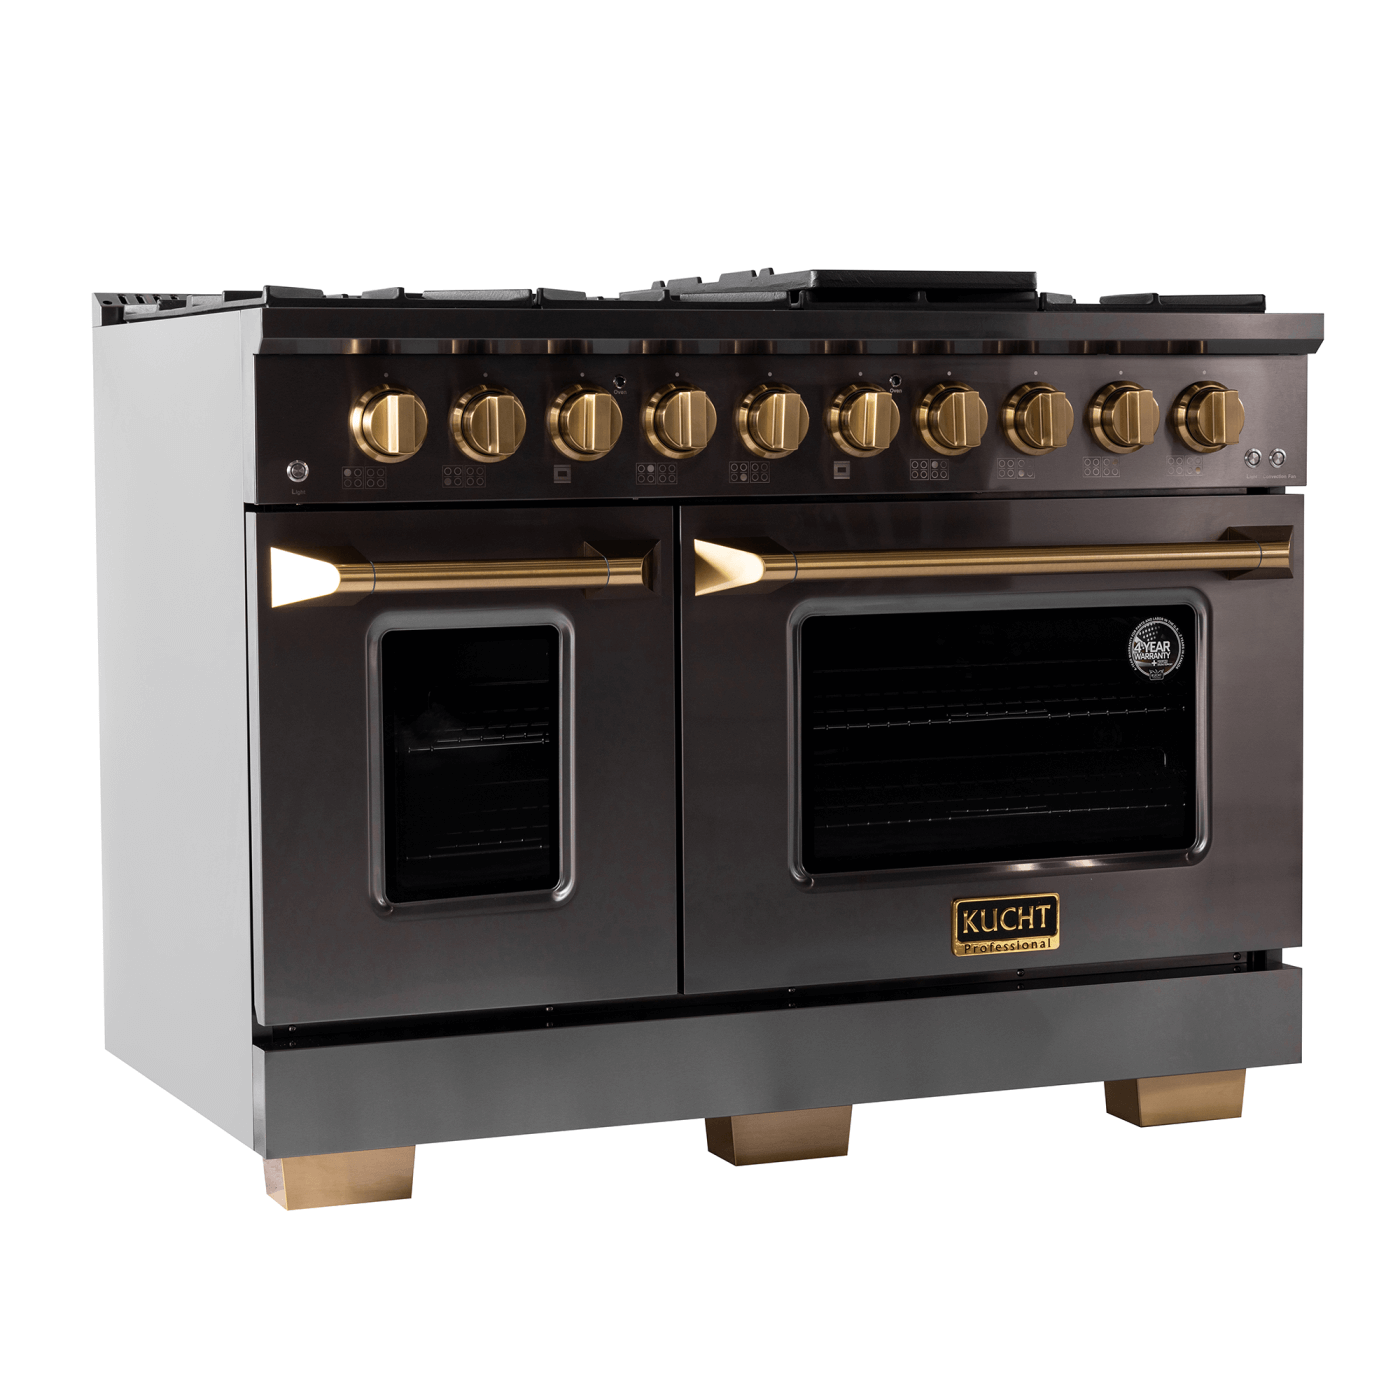 Kucht Gemstone 48 in. 6.7 cu. ft. 8 Burners Propane Gas Range with Two Ovens - One Convection - in Titanium Stainless Steel (KEG483)  - white background